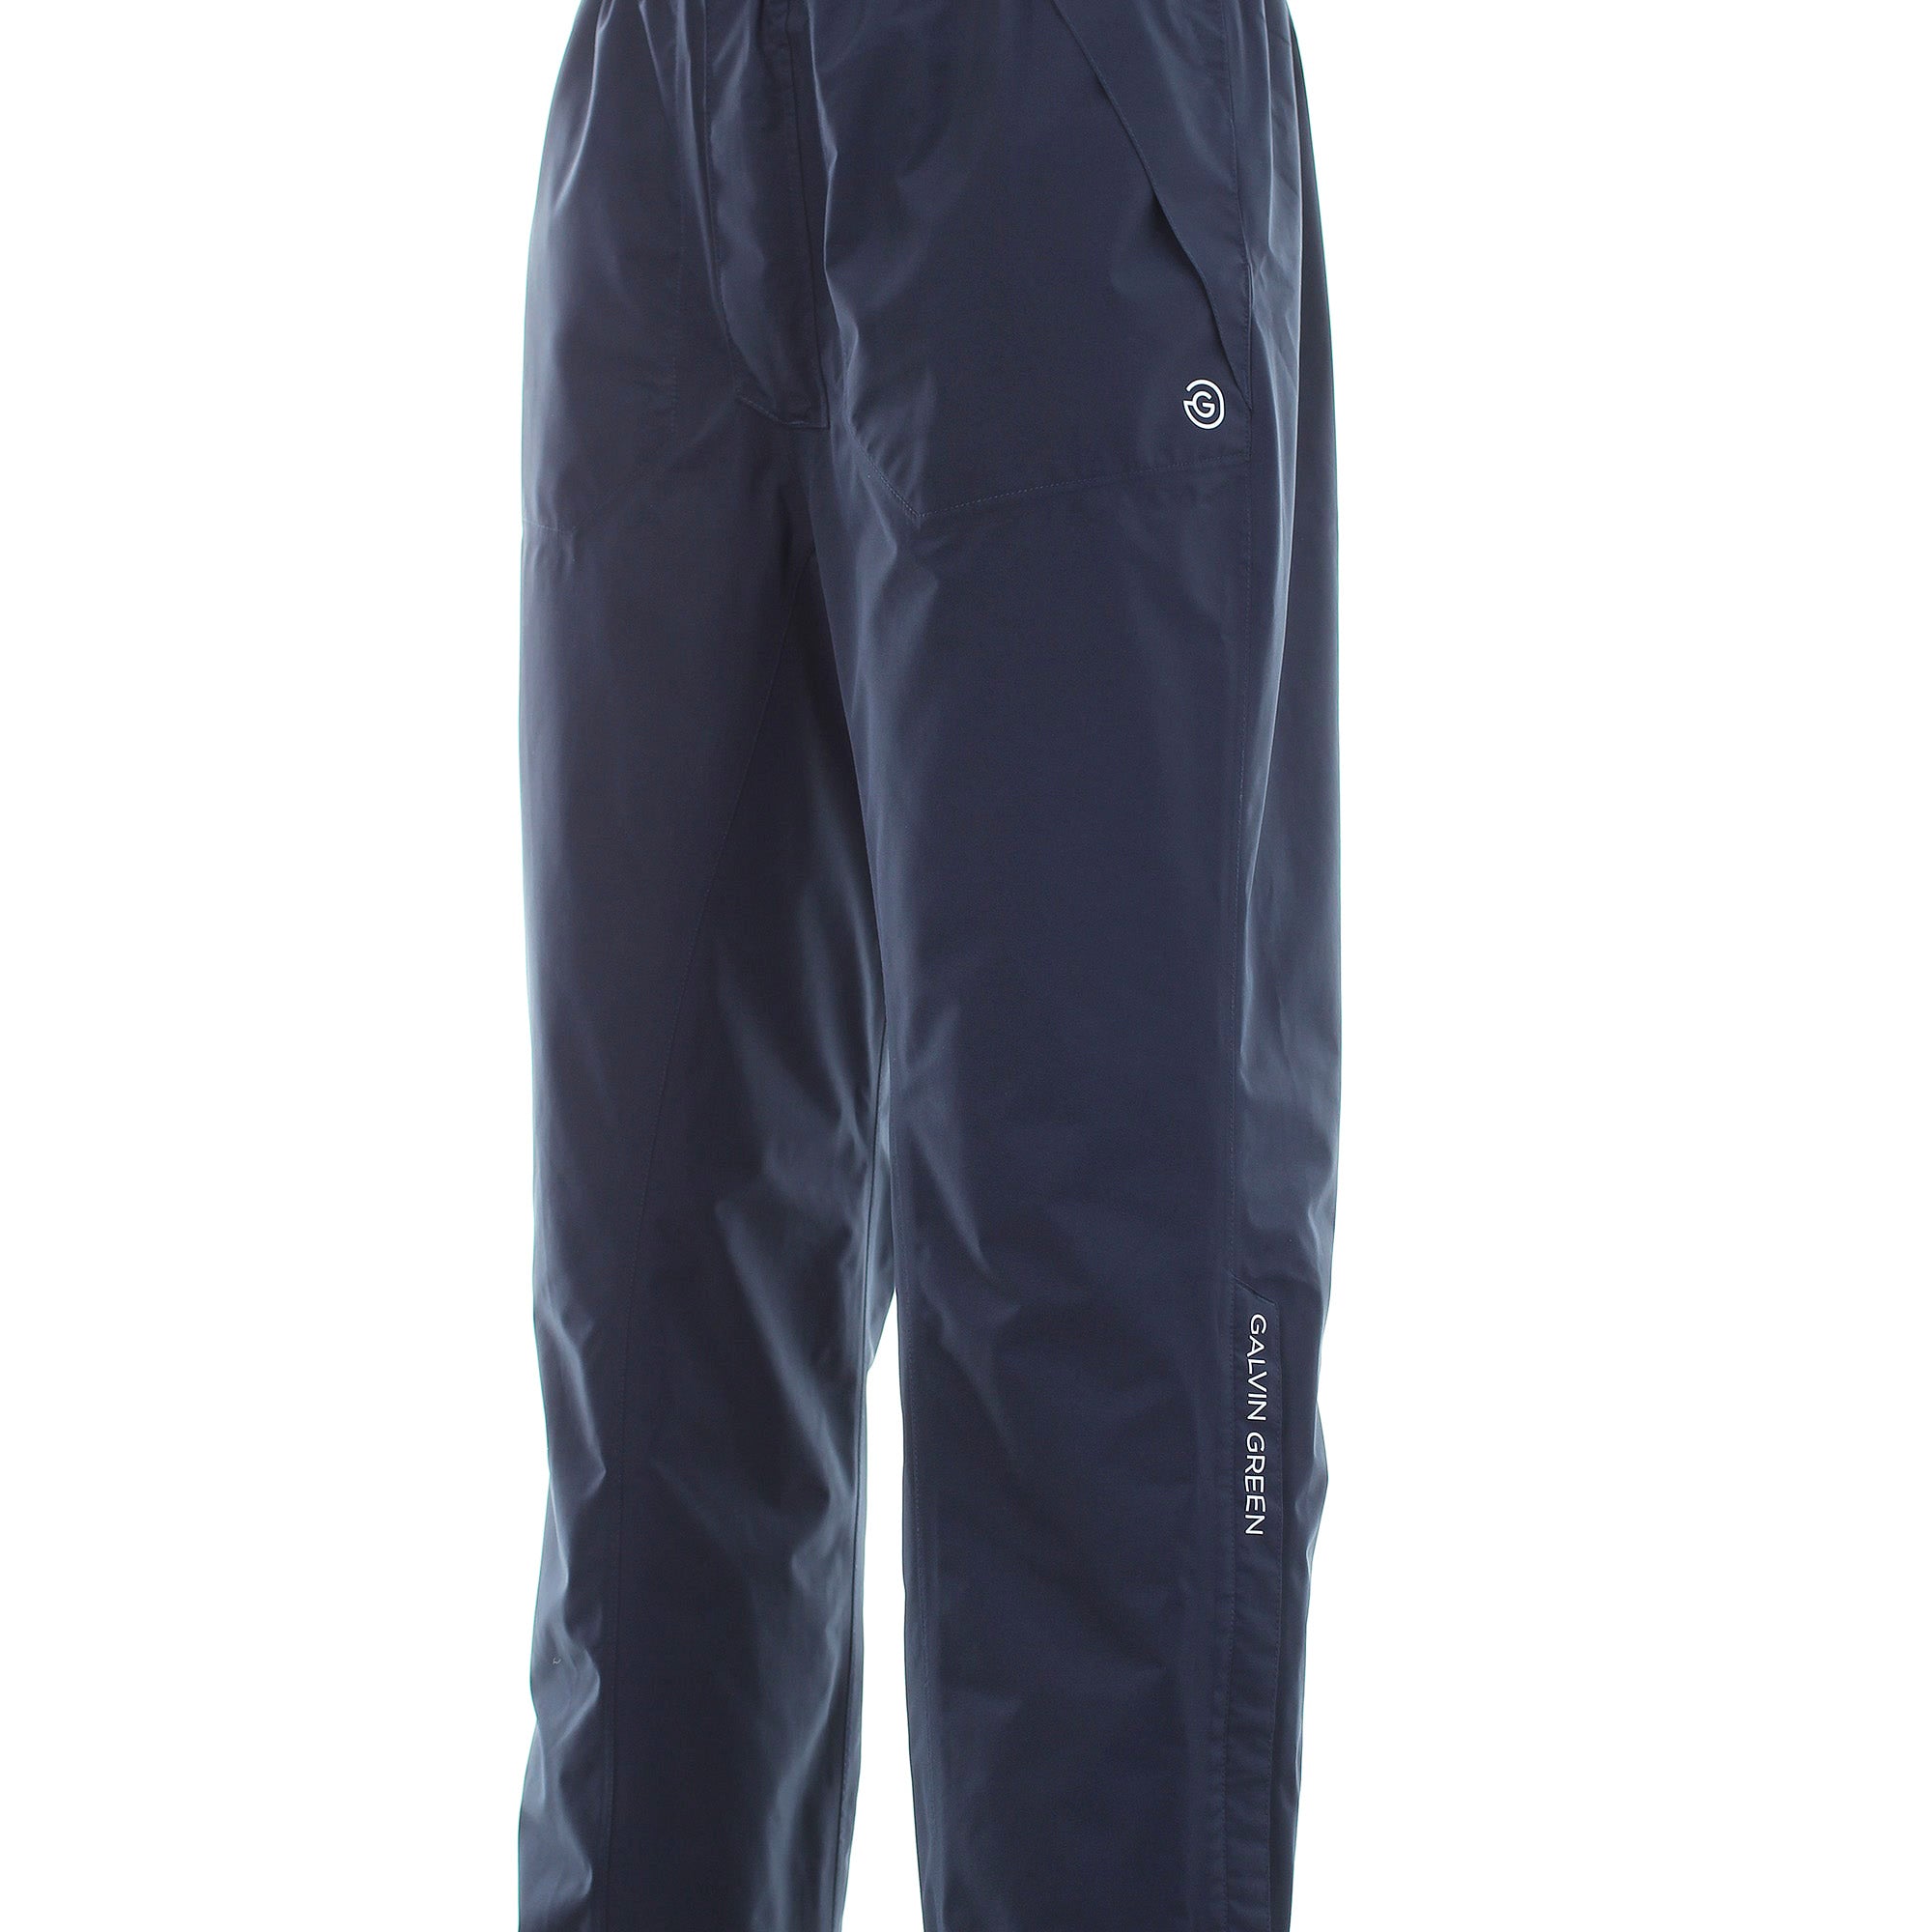 galvin-green-andy-gore-tex-waterproof-golf-trousers-navy